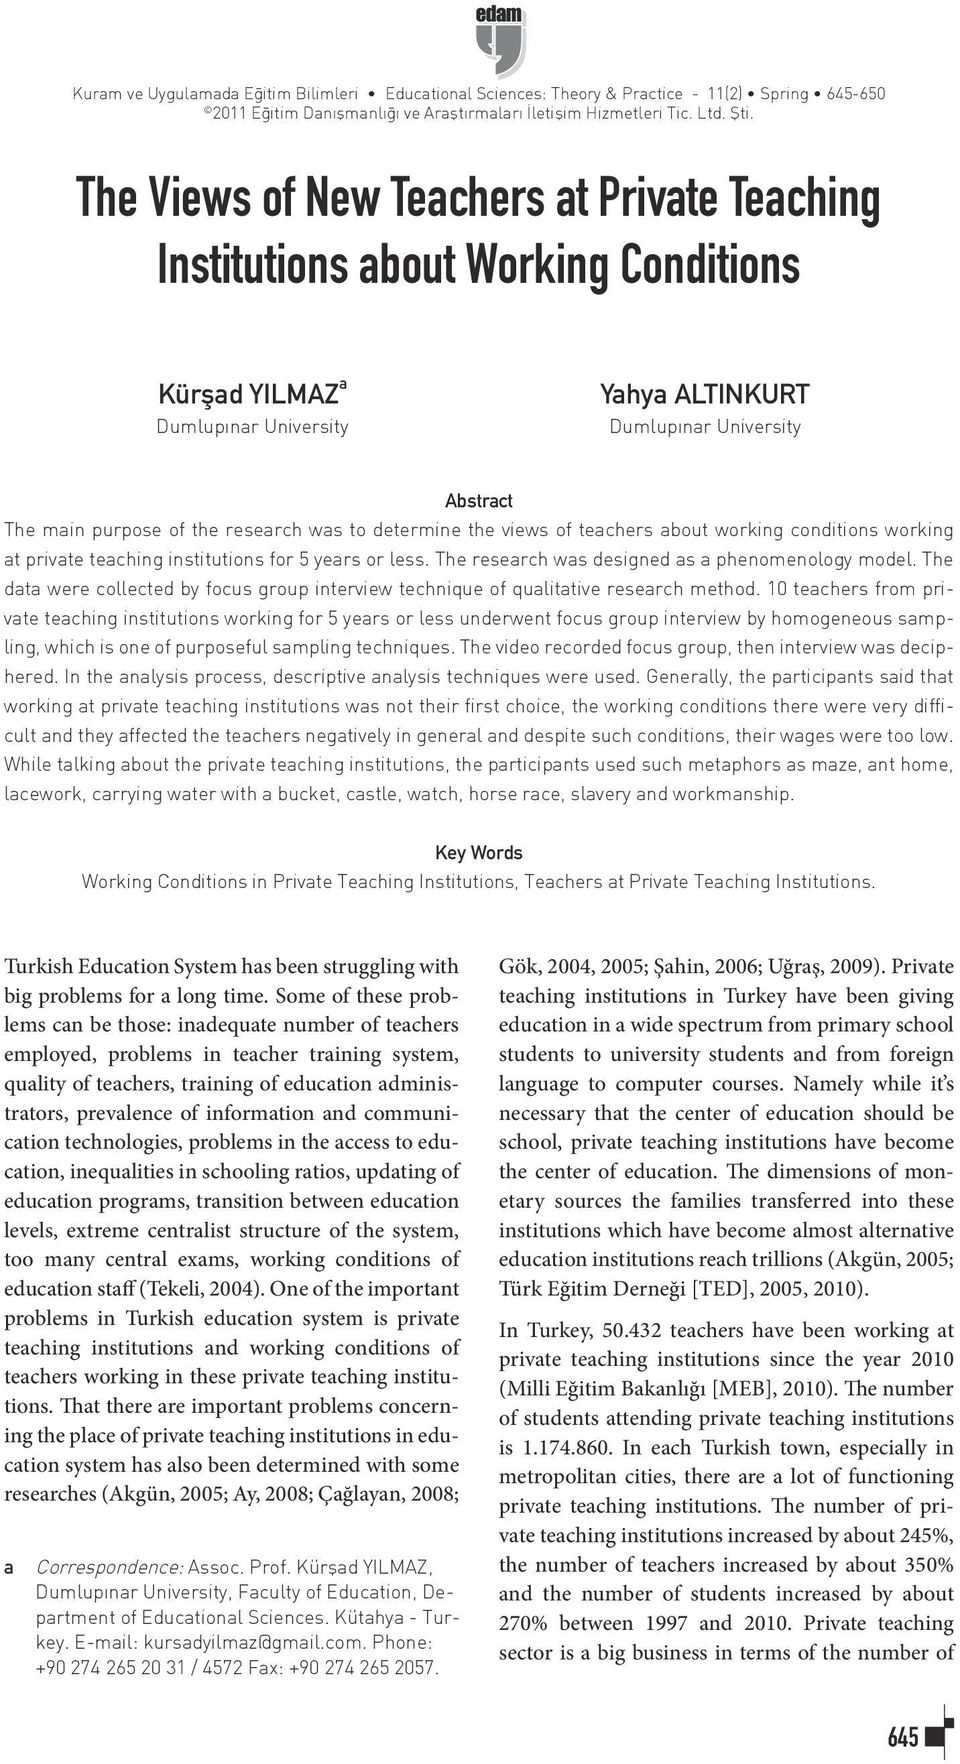 research was to determine the views of teachers about working conditions working at private teaching institutions for 5 years or less. The research was designed as a phenomenology model.